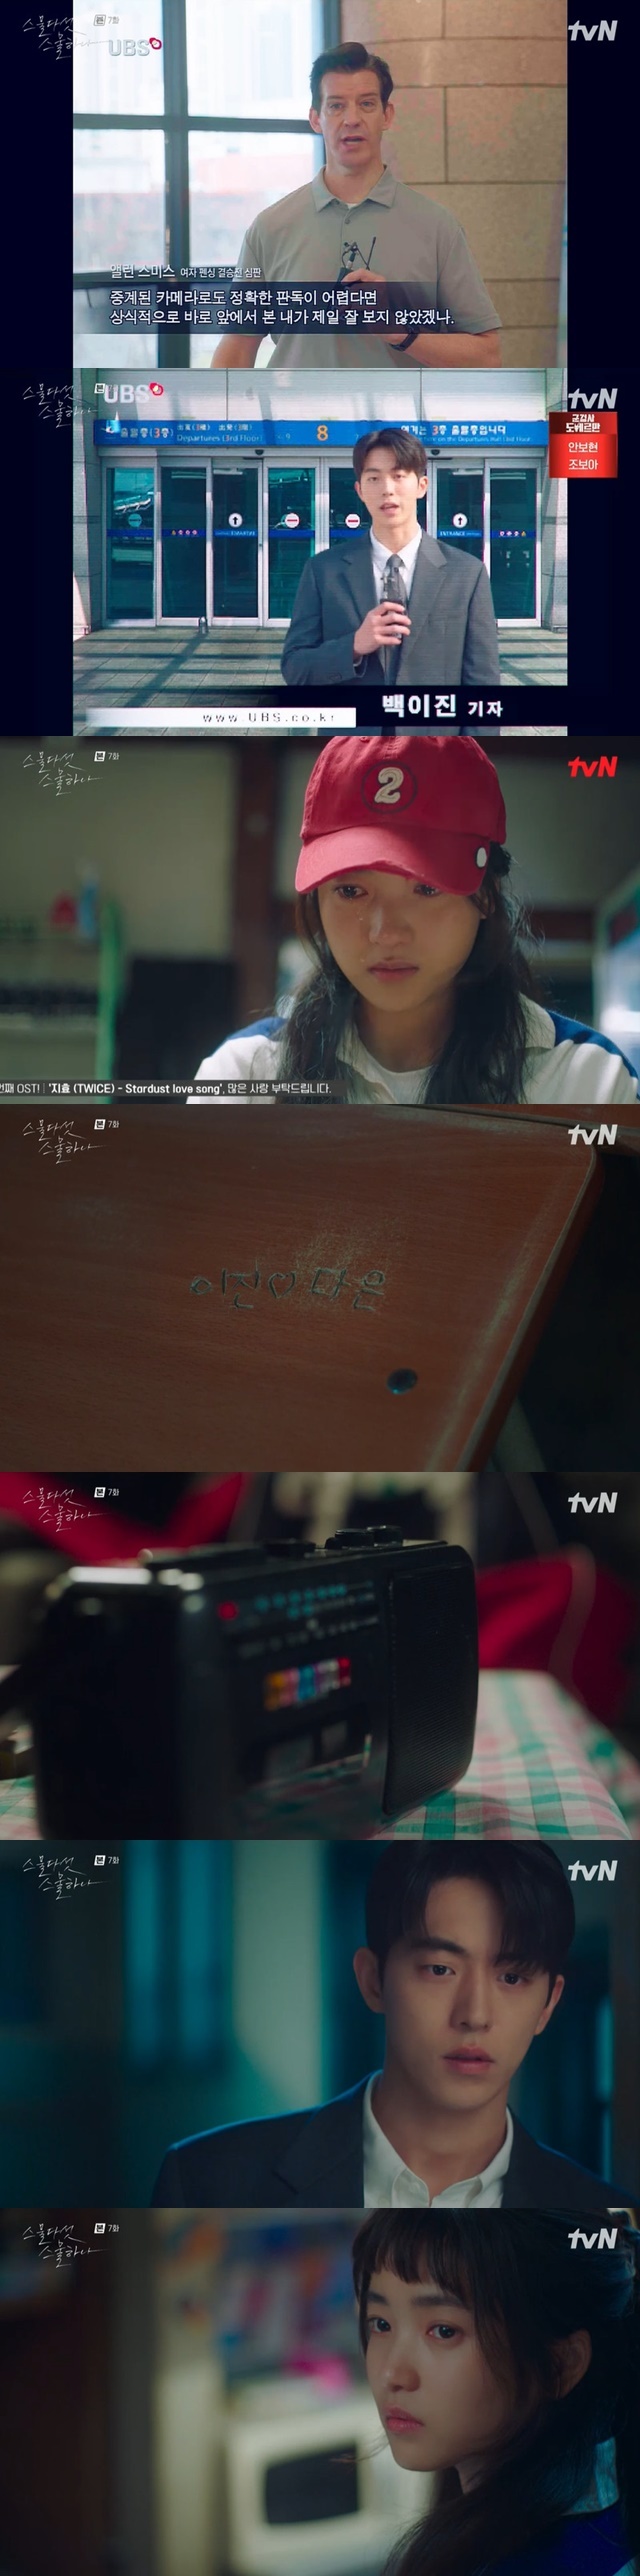 Kim Tae-ri washed off fencing gold medal decision Sibi and wept thanks to Nam Joo-hyuk.In the 7th episode of TVNs Saturday drama Twenty Five Twinty One broadcast on March 5 (playplayed by Kwon Do-eun/directed by Jung Ji-hyun), Na Hee-do (played by Kim Tae-ri) suffered a gold medal decision Sibi.Na Hee-do (Kim Tae-ri) and Ko Yu Rim (Bona) faced each other in the final of the Asian Games fencing and Na Hee-do won by one point while playing a close game.Na Hee-do cheered for the gold medal, but the atmosphere was reversed as the high Yu Rim insisted on misgivings.The audience protested that the high Yu Rim protested with tears that he was faster, and that the gold medalist Yu Rim lost the gold medal.Na Hee-do left the scene without permission, and Lee Jin (Nam Joo-hyuk) followed Na Hee-do and wrote a wish-giving note that he had won by making a bet before him.No more incidents. Lets go back.Nahees mother, Shin Jae-kyung (Seo Jae-hee), reported directly on the news that the high Yu Rim had lost the gold medal, and Na Hee-do also saw the news.Both Na Hee-do and Ko Yu Rim were kicked out of the athletic village and ordered to wait for discipline at home.The high Yu Rim hugged his father with tears, and Na Hee-do climbed on the train alone and missed his father.Lee Jin asked Interview to stay in the hotel lobby to pick up the referees interview, and to visit the referee who left the next day and suspect that the referee was bought.The referee interviewed that the players could be mistaken in excitement but they did not mistake themselves, and Lee Jin reported the referees interview alone.Na Hee-do couldnt go home, but she was trying to eat at the restaurant when she watched the news and shed tears. Other guests who recognized Na Hee-do, who was crying, said, Yesterdays game was great.We will continue to ask for our fencing. The late Yu Rim was comforted by Moon Ji-woong (Choi Hyun-wook), and Na Hee-do couldnt return home and tried to sleep in the school warehouse. When the guard locked the door and was in crisis, he called back Lee Jin to ask for help.Lee Jin knew the key password and headed to school with Ji Seung-wan (Lee Joo-myeong) and Moon Ji-woong.In the meantime, Na Hee-do heard the voice of a back-Lee Jins past lover on the back-of-high school broadcast tape.